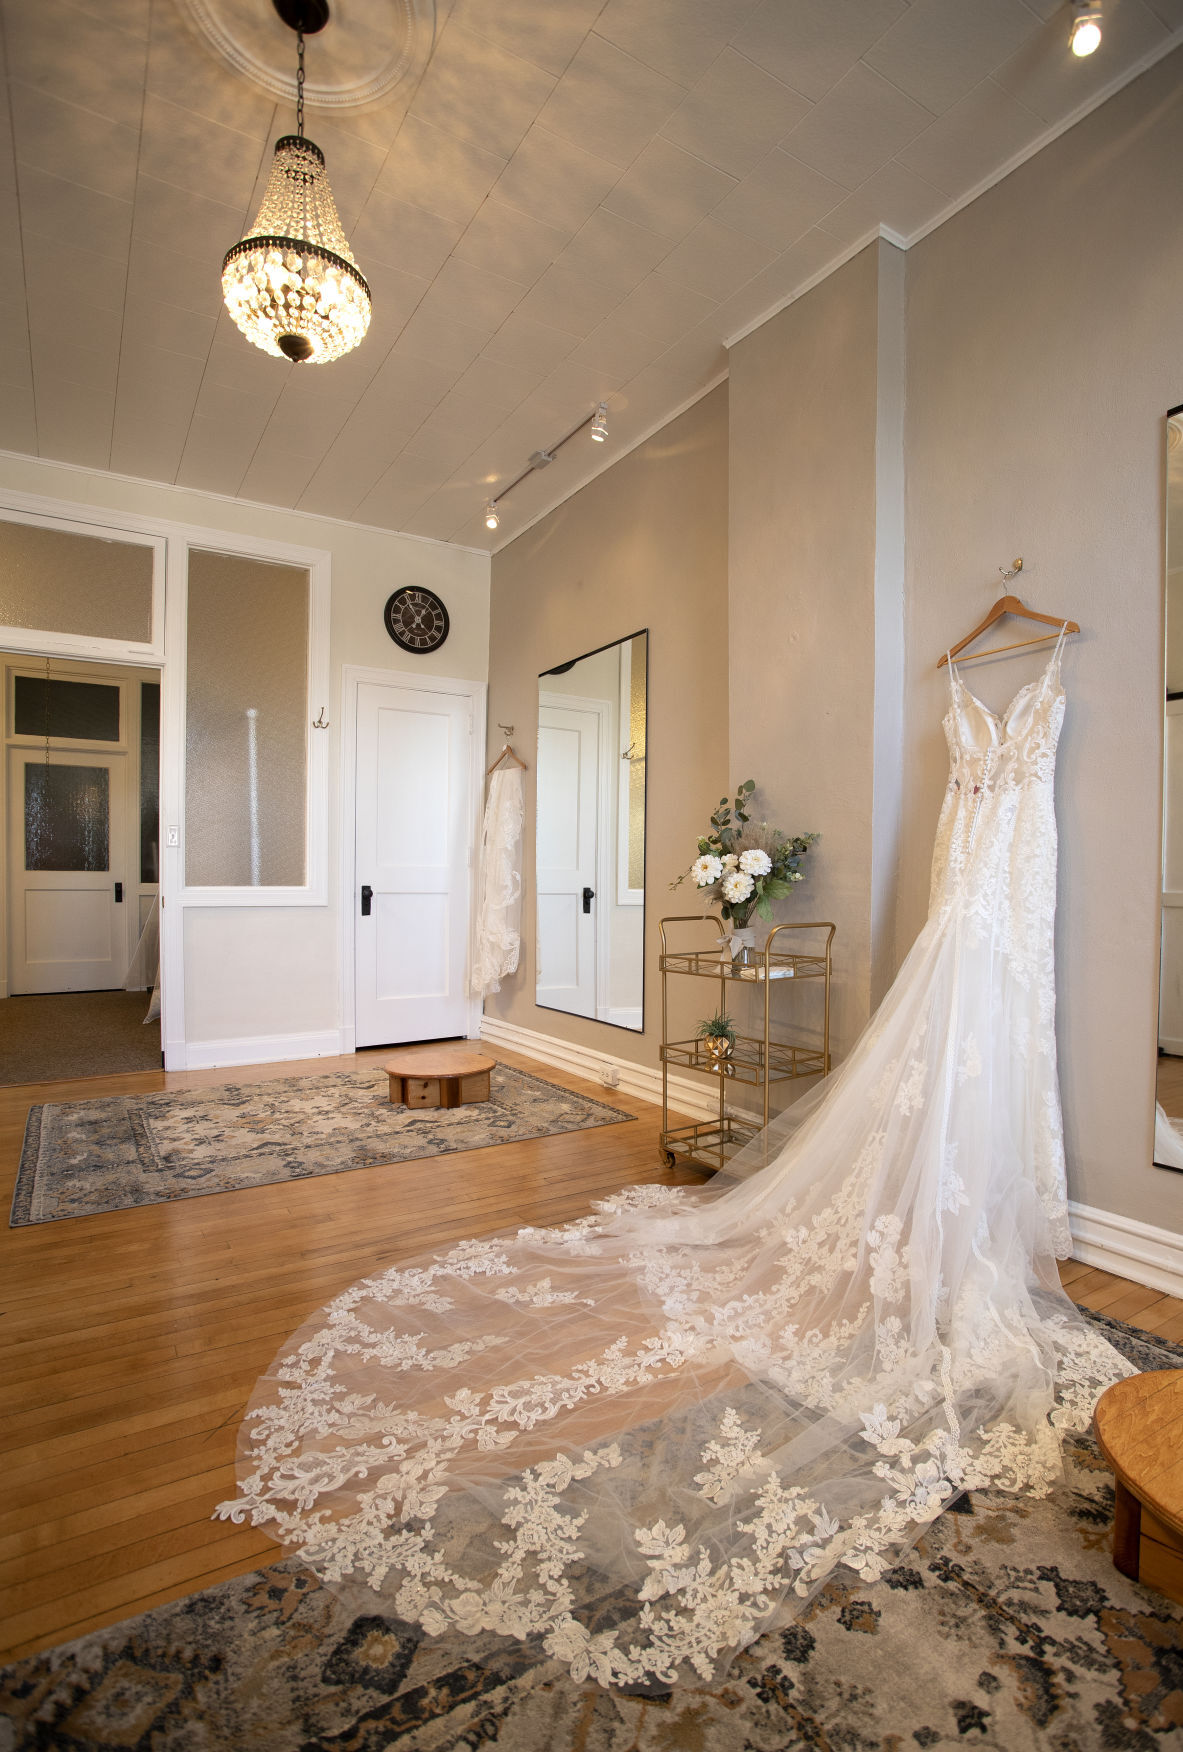 The newly remodeled bridal suite at Bridal Boutique in Platteville, Wis.    PHOTO CREDIT: Stephen Gassman